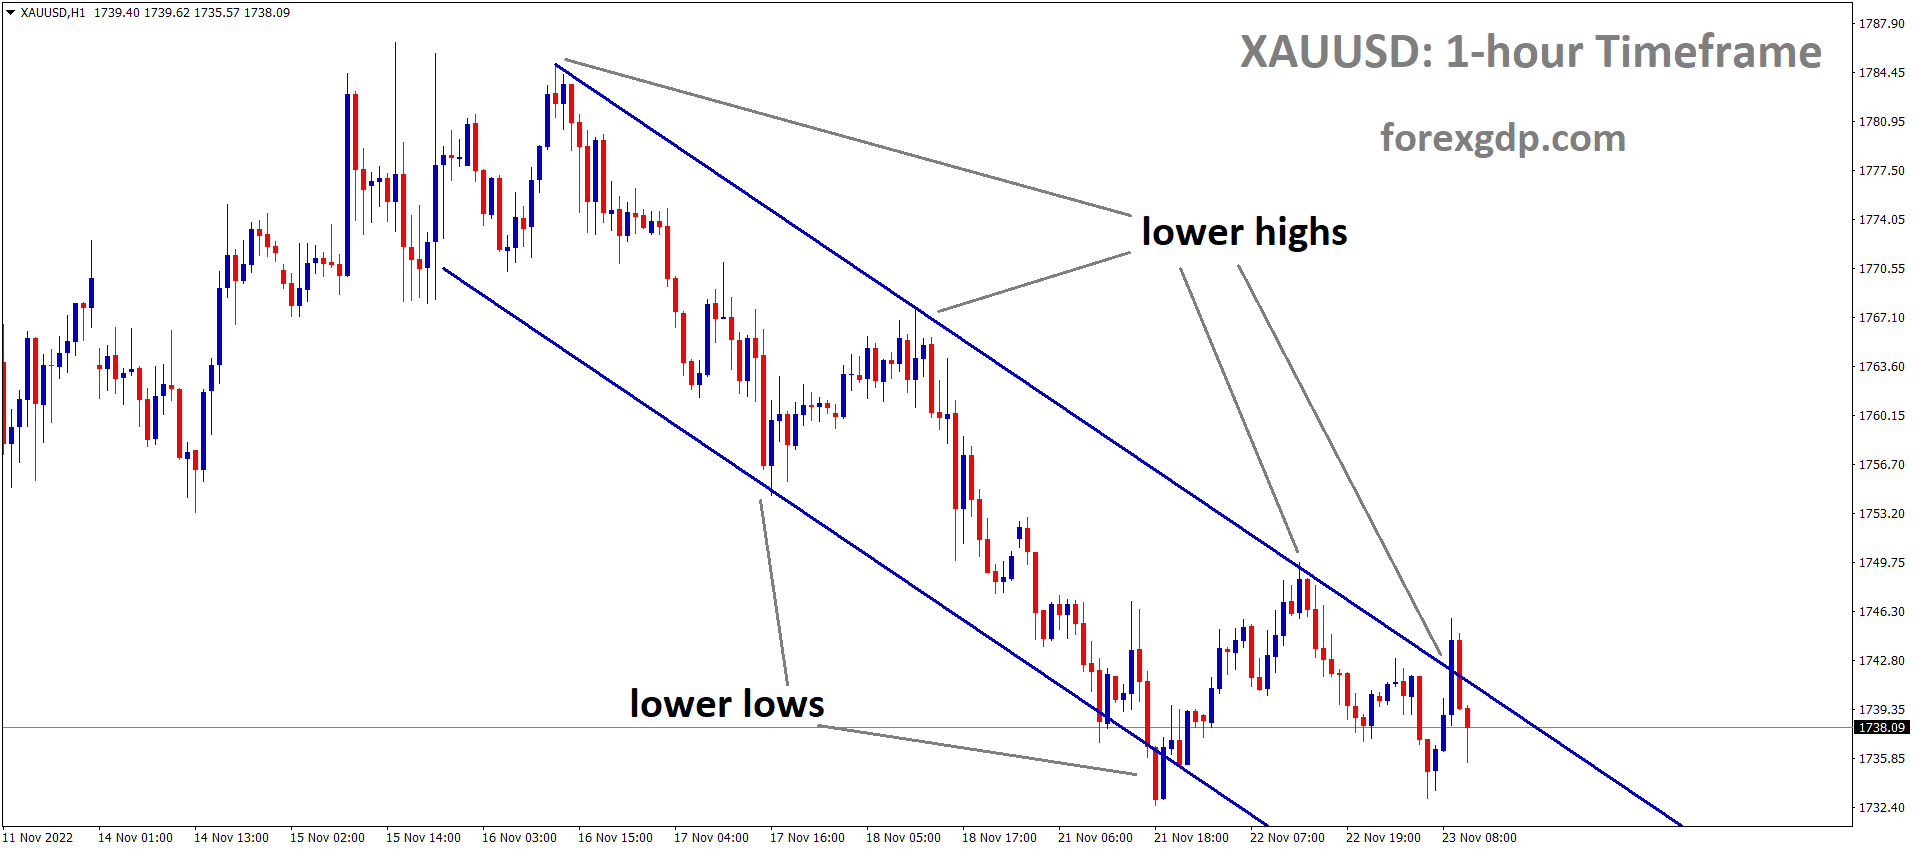 XAUUSD Gold price is moving in the Descending channel and the market has fallen from the lower high area of the channel